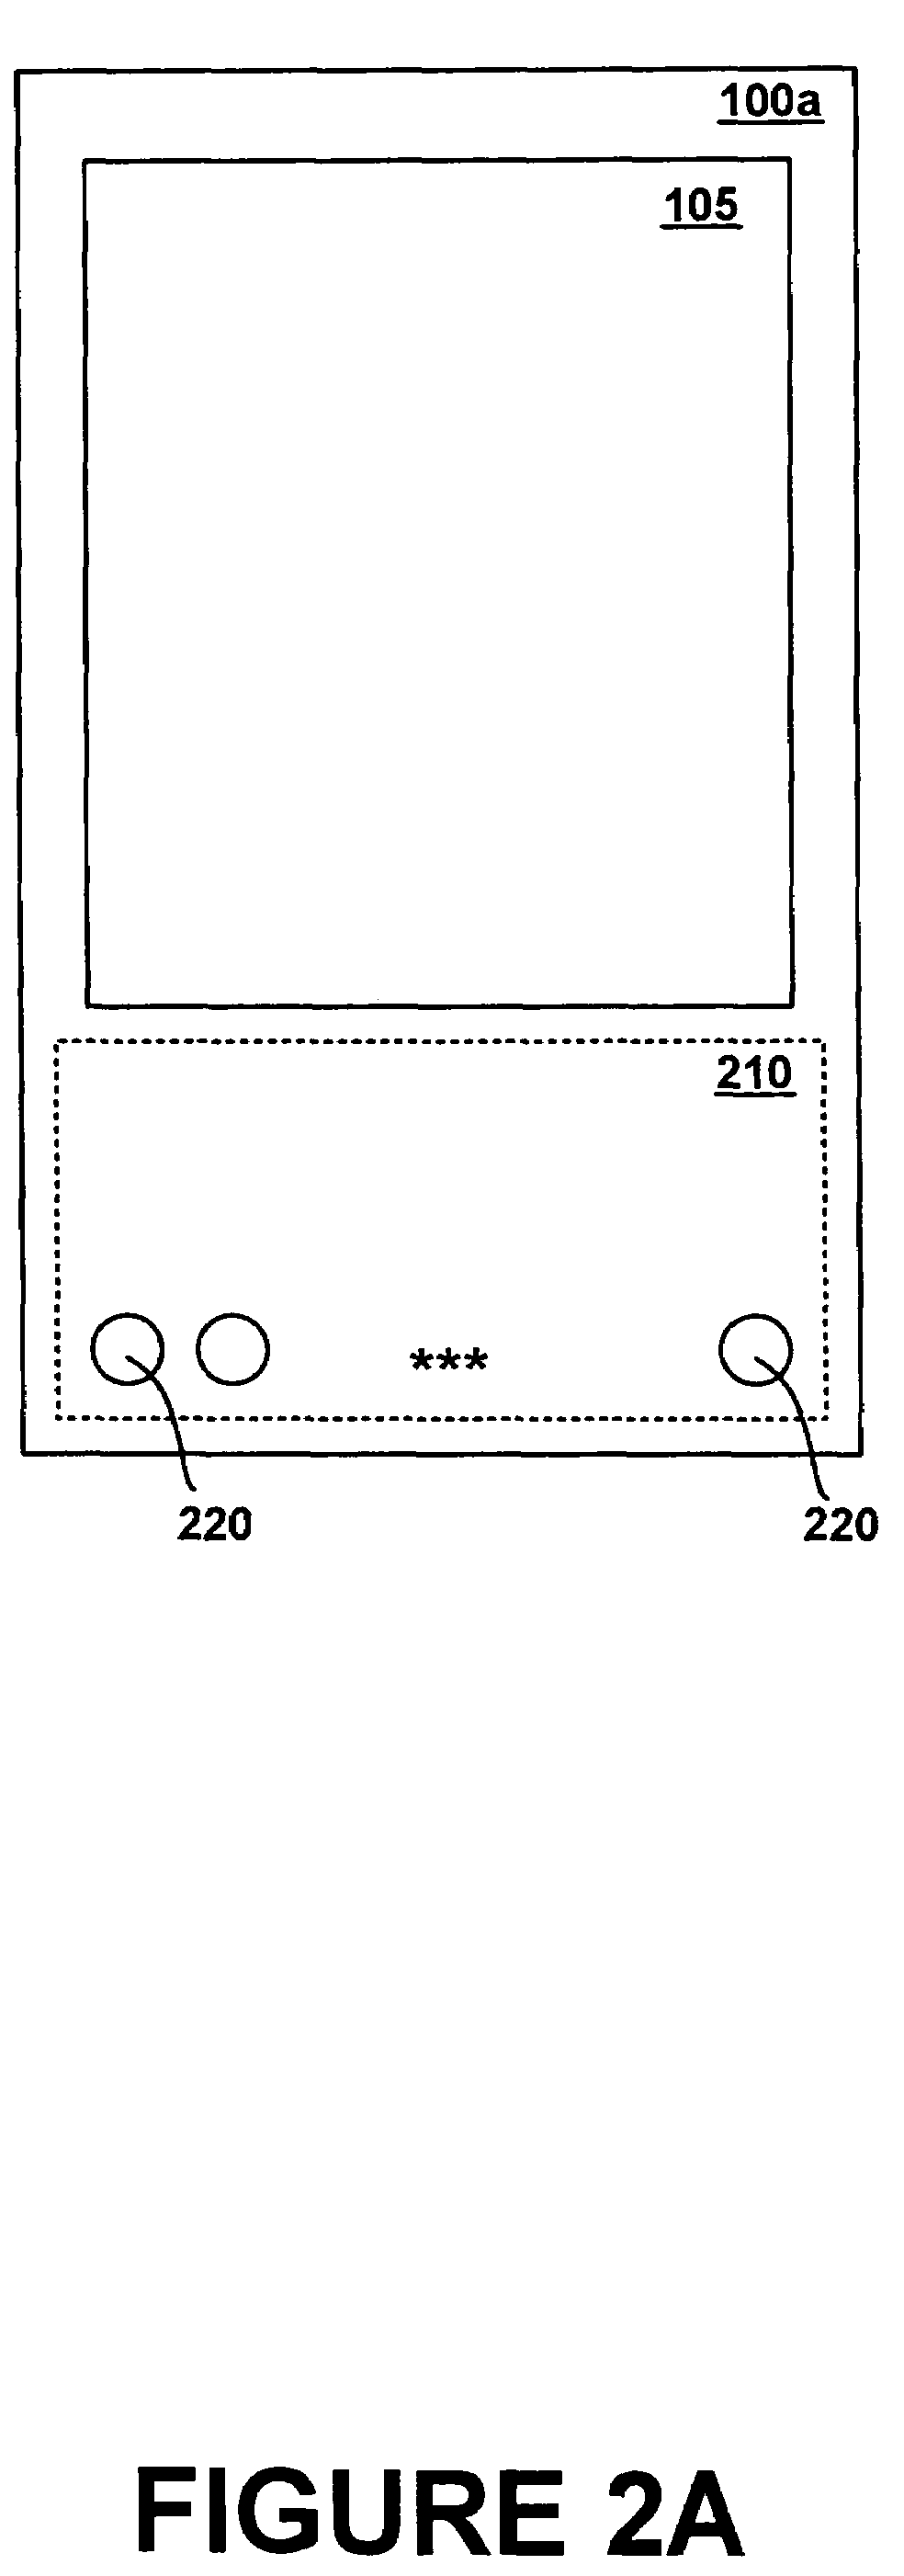 Integrated removable functional faceplate for portable computer system